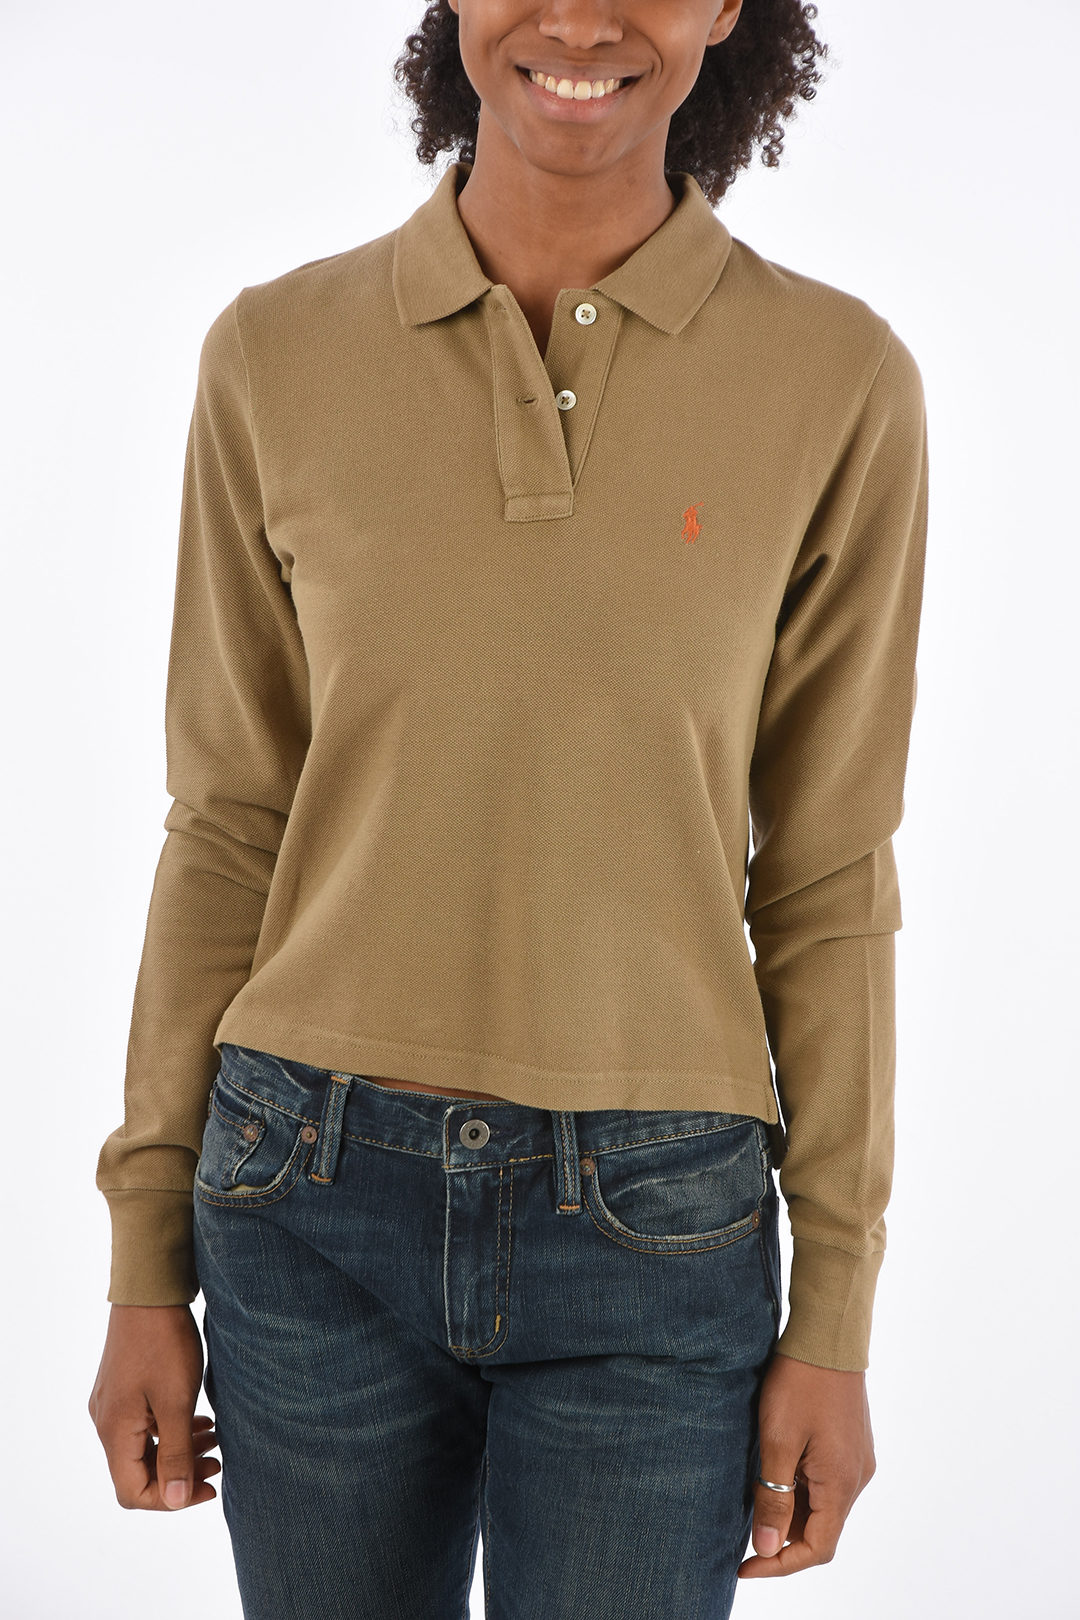 Polo Ralph Lauren embroidered logo long sleeve polo women - Glamood Outlet